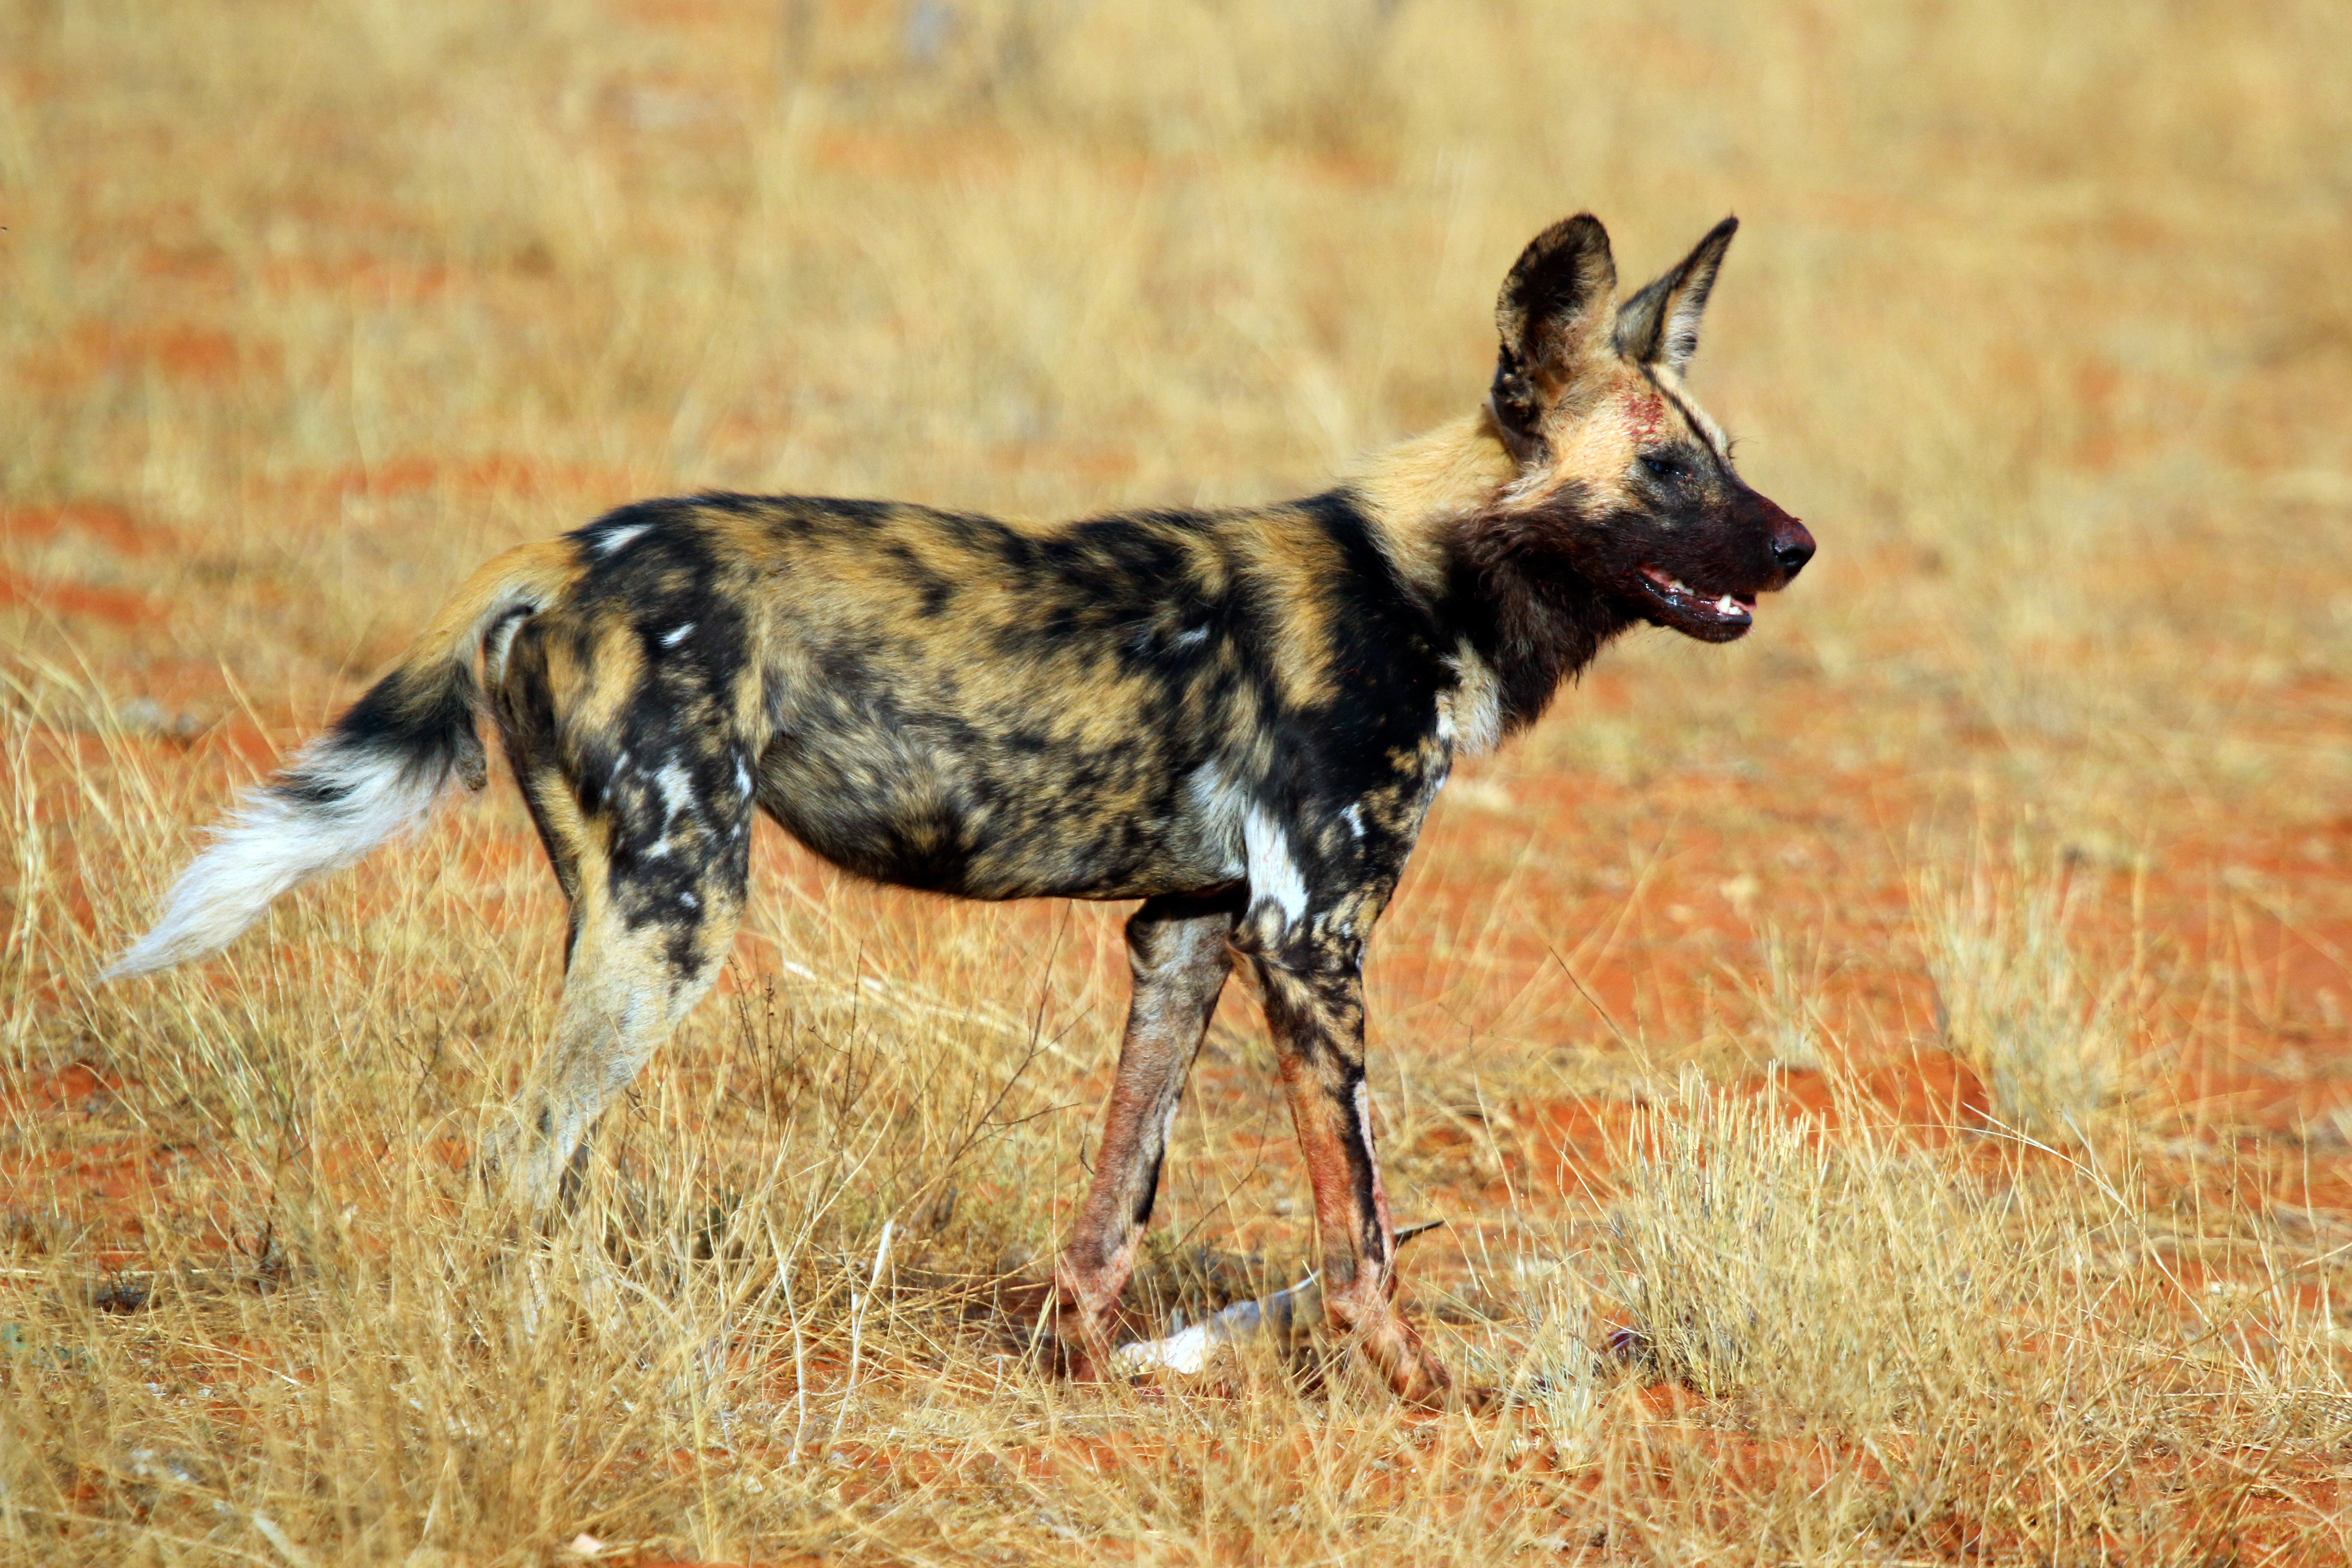 File:African wild dog (Lycaon pictus pictus).jpg - Wikimedia Commons